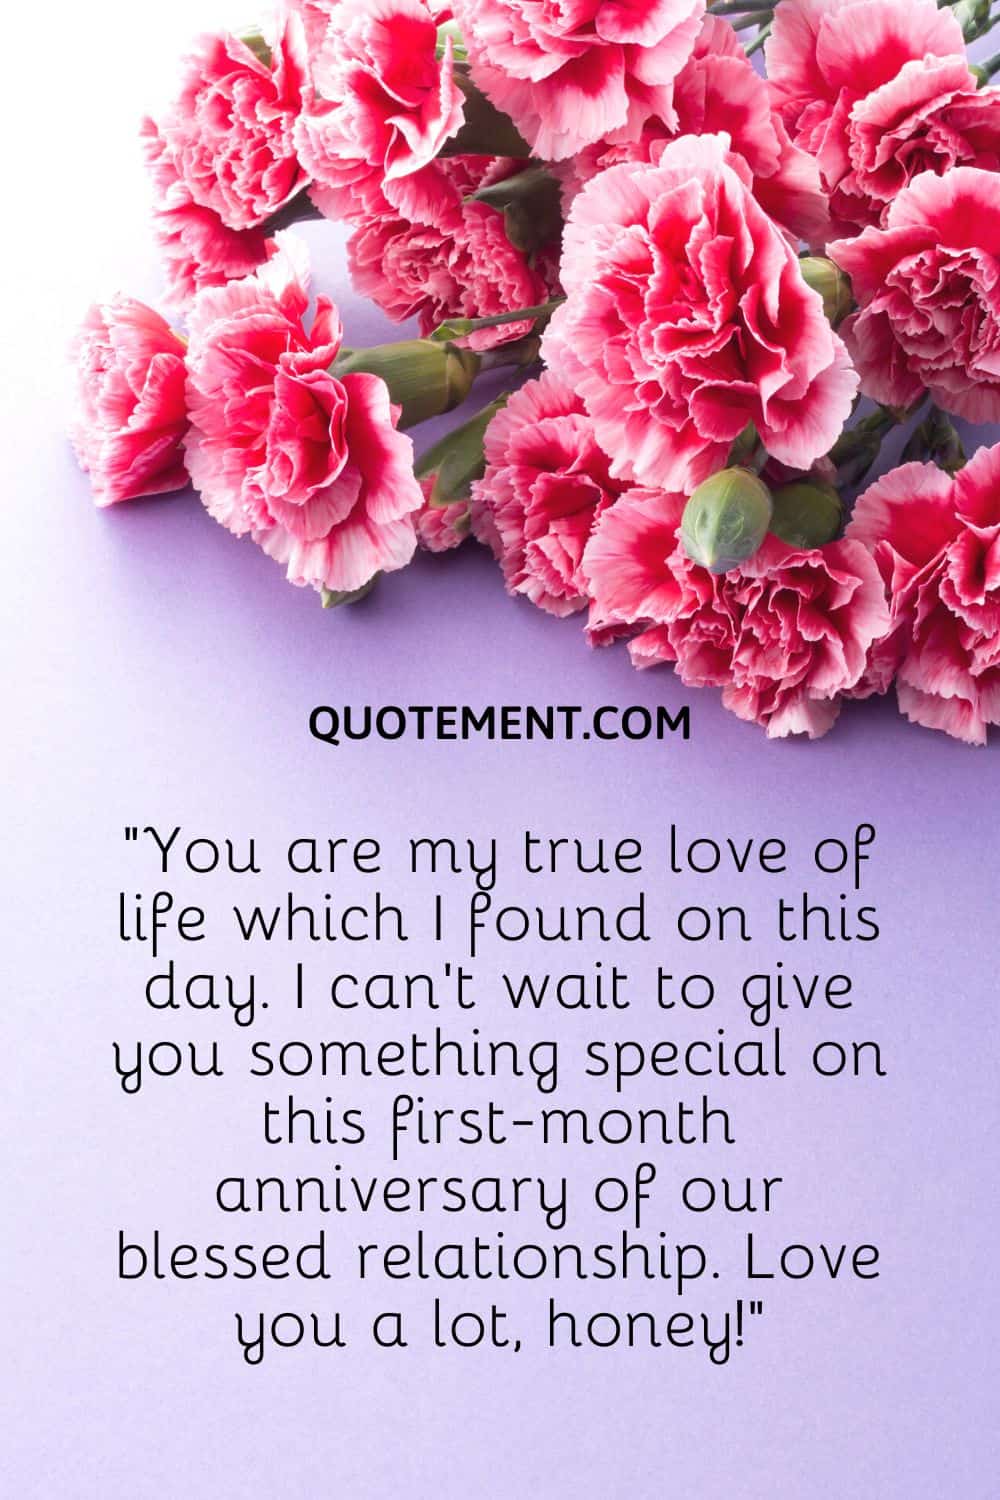 You are my true love of life which I found on this day